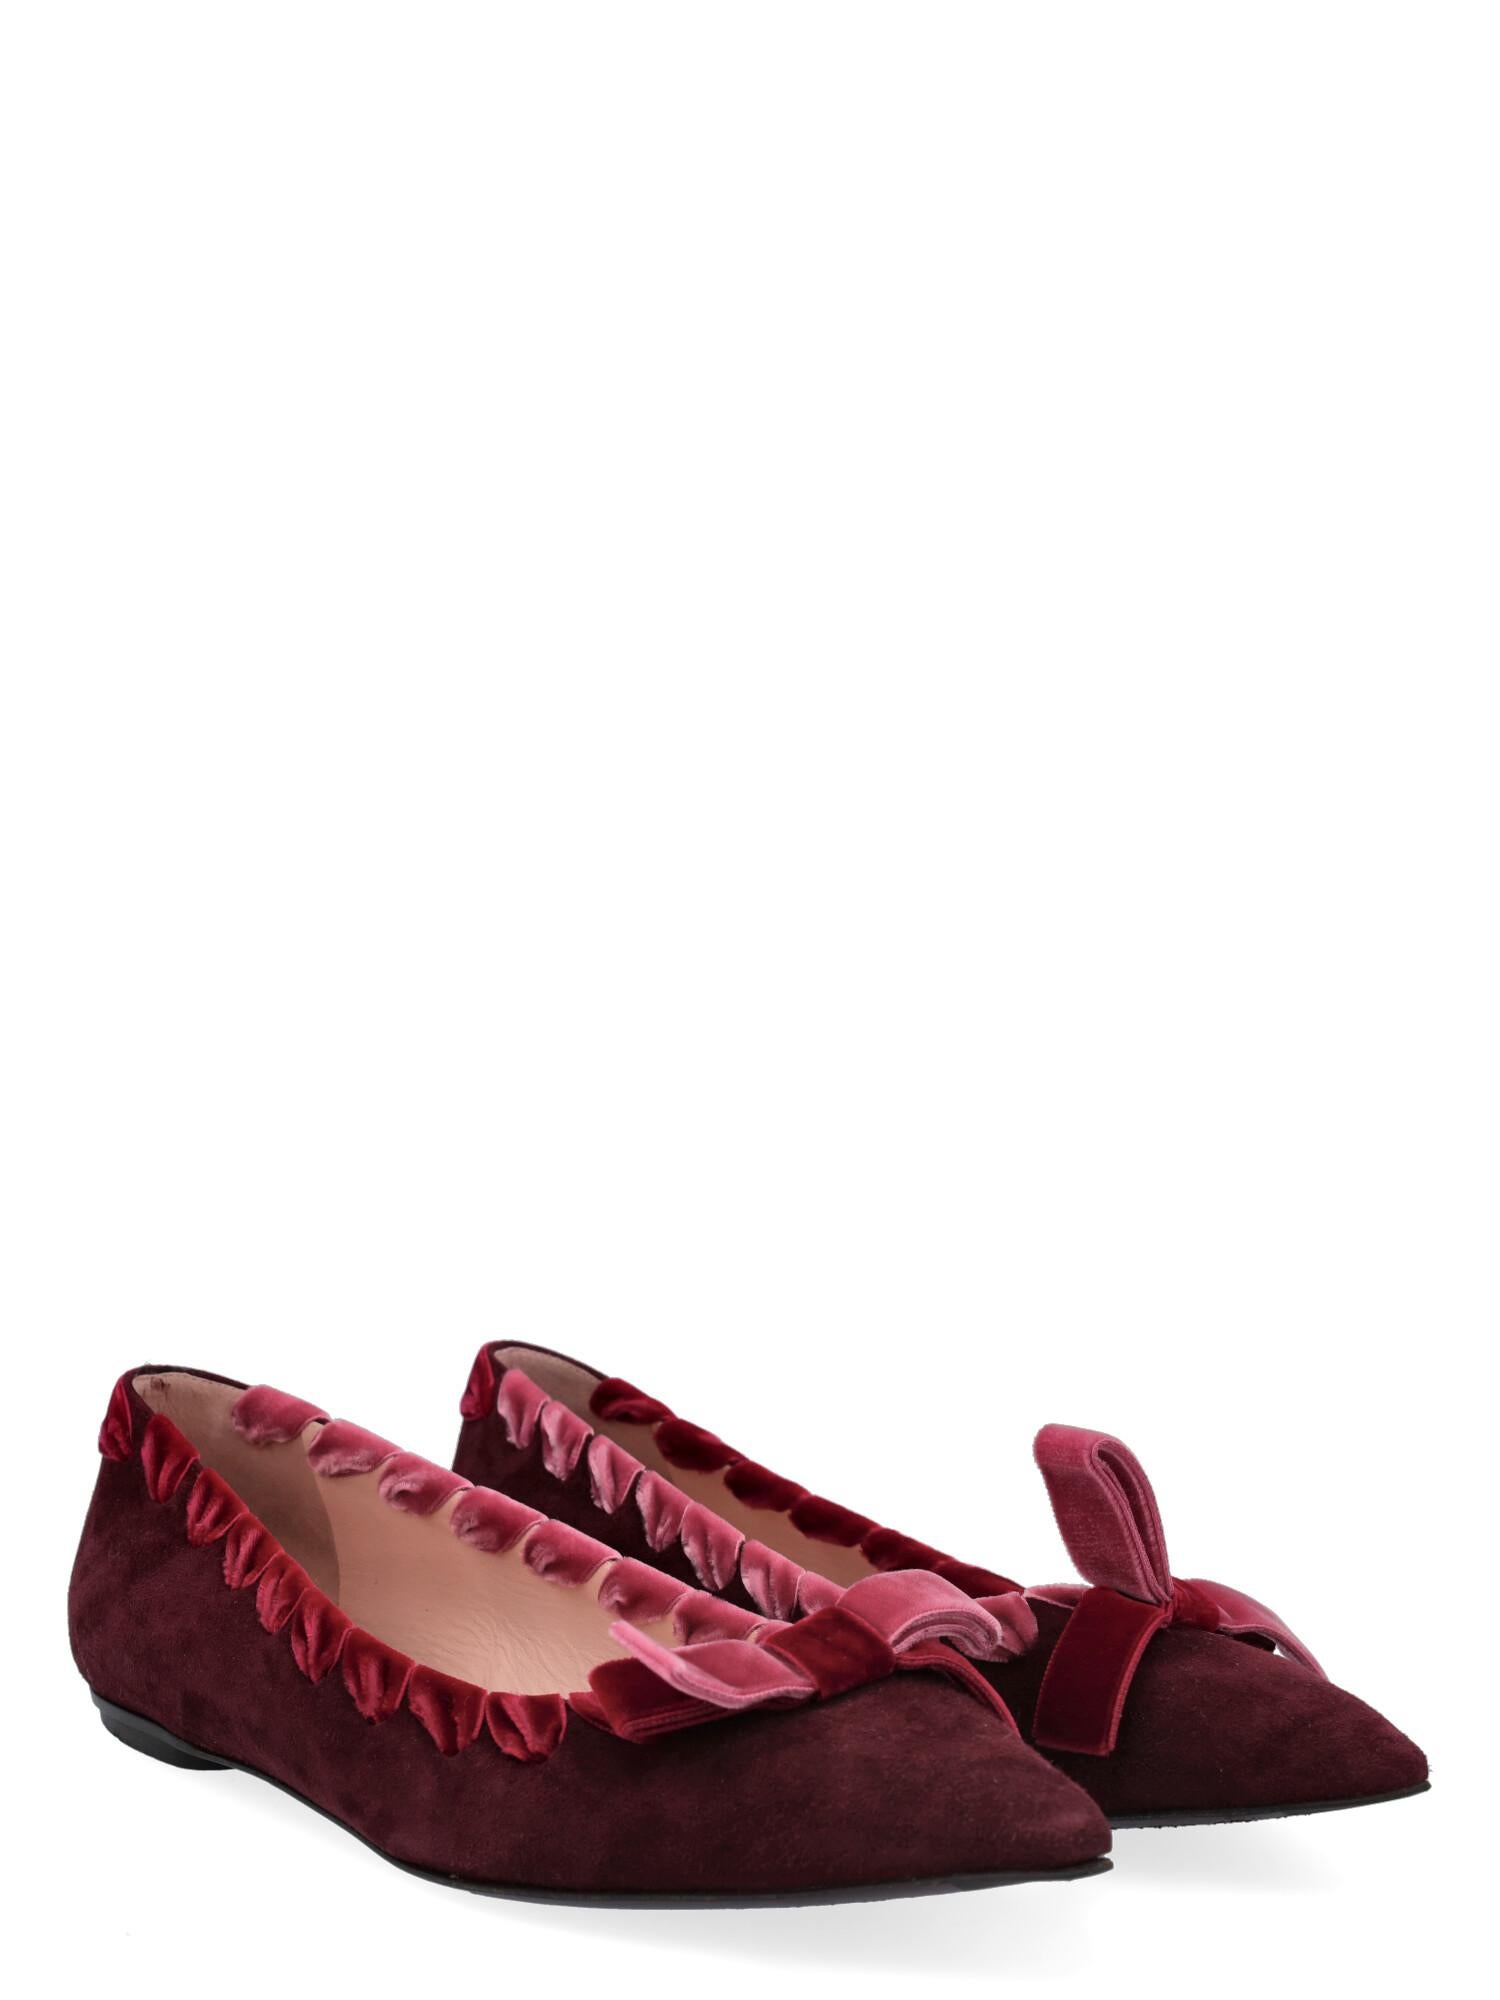 Product Description: Ballet flats, leather, solid color, suede, no fastening, pointed toe, branded insole, velvet trim.

Includes:
-Dust bag

Product Condition: Very Good
Sole: visible signs of use. Upper: negligible abrasions, negligible